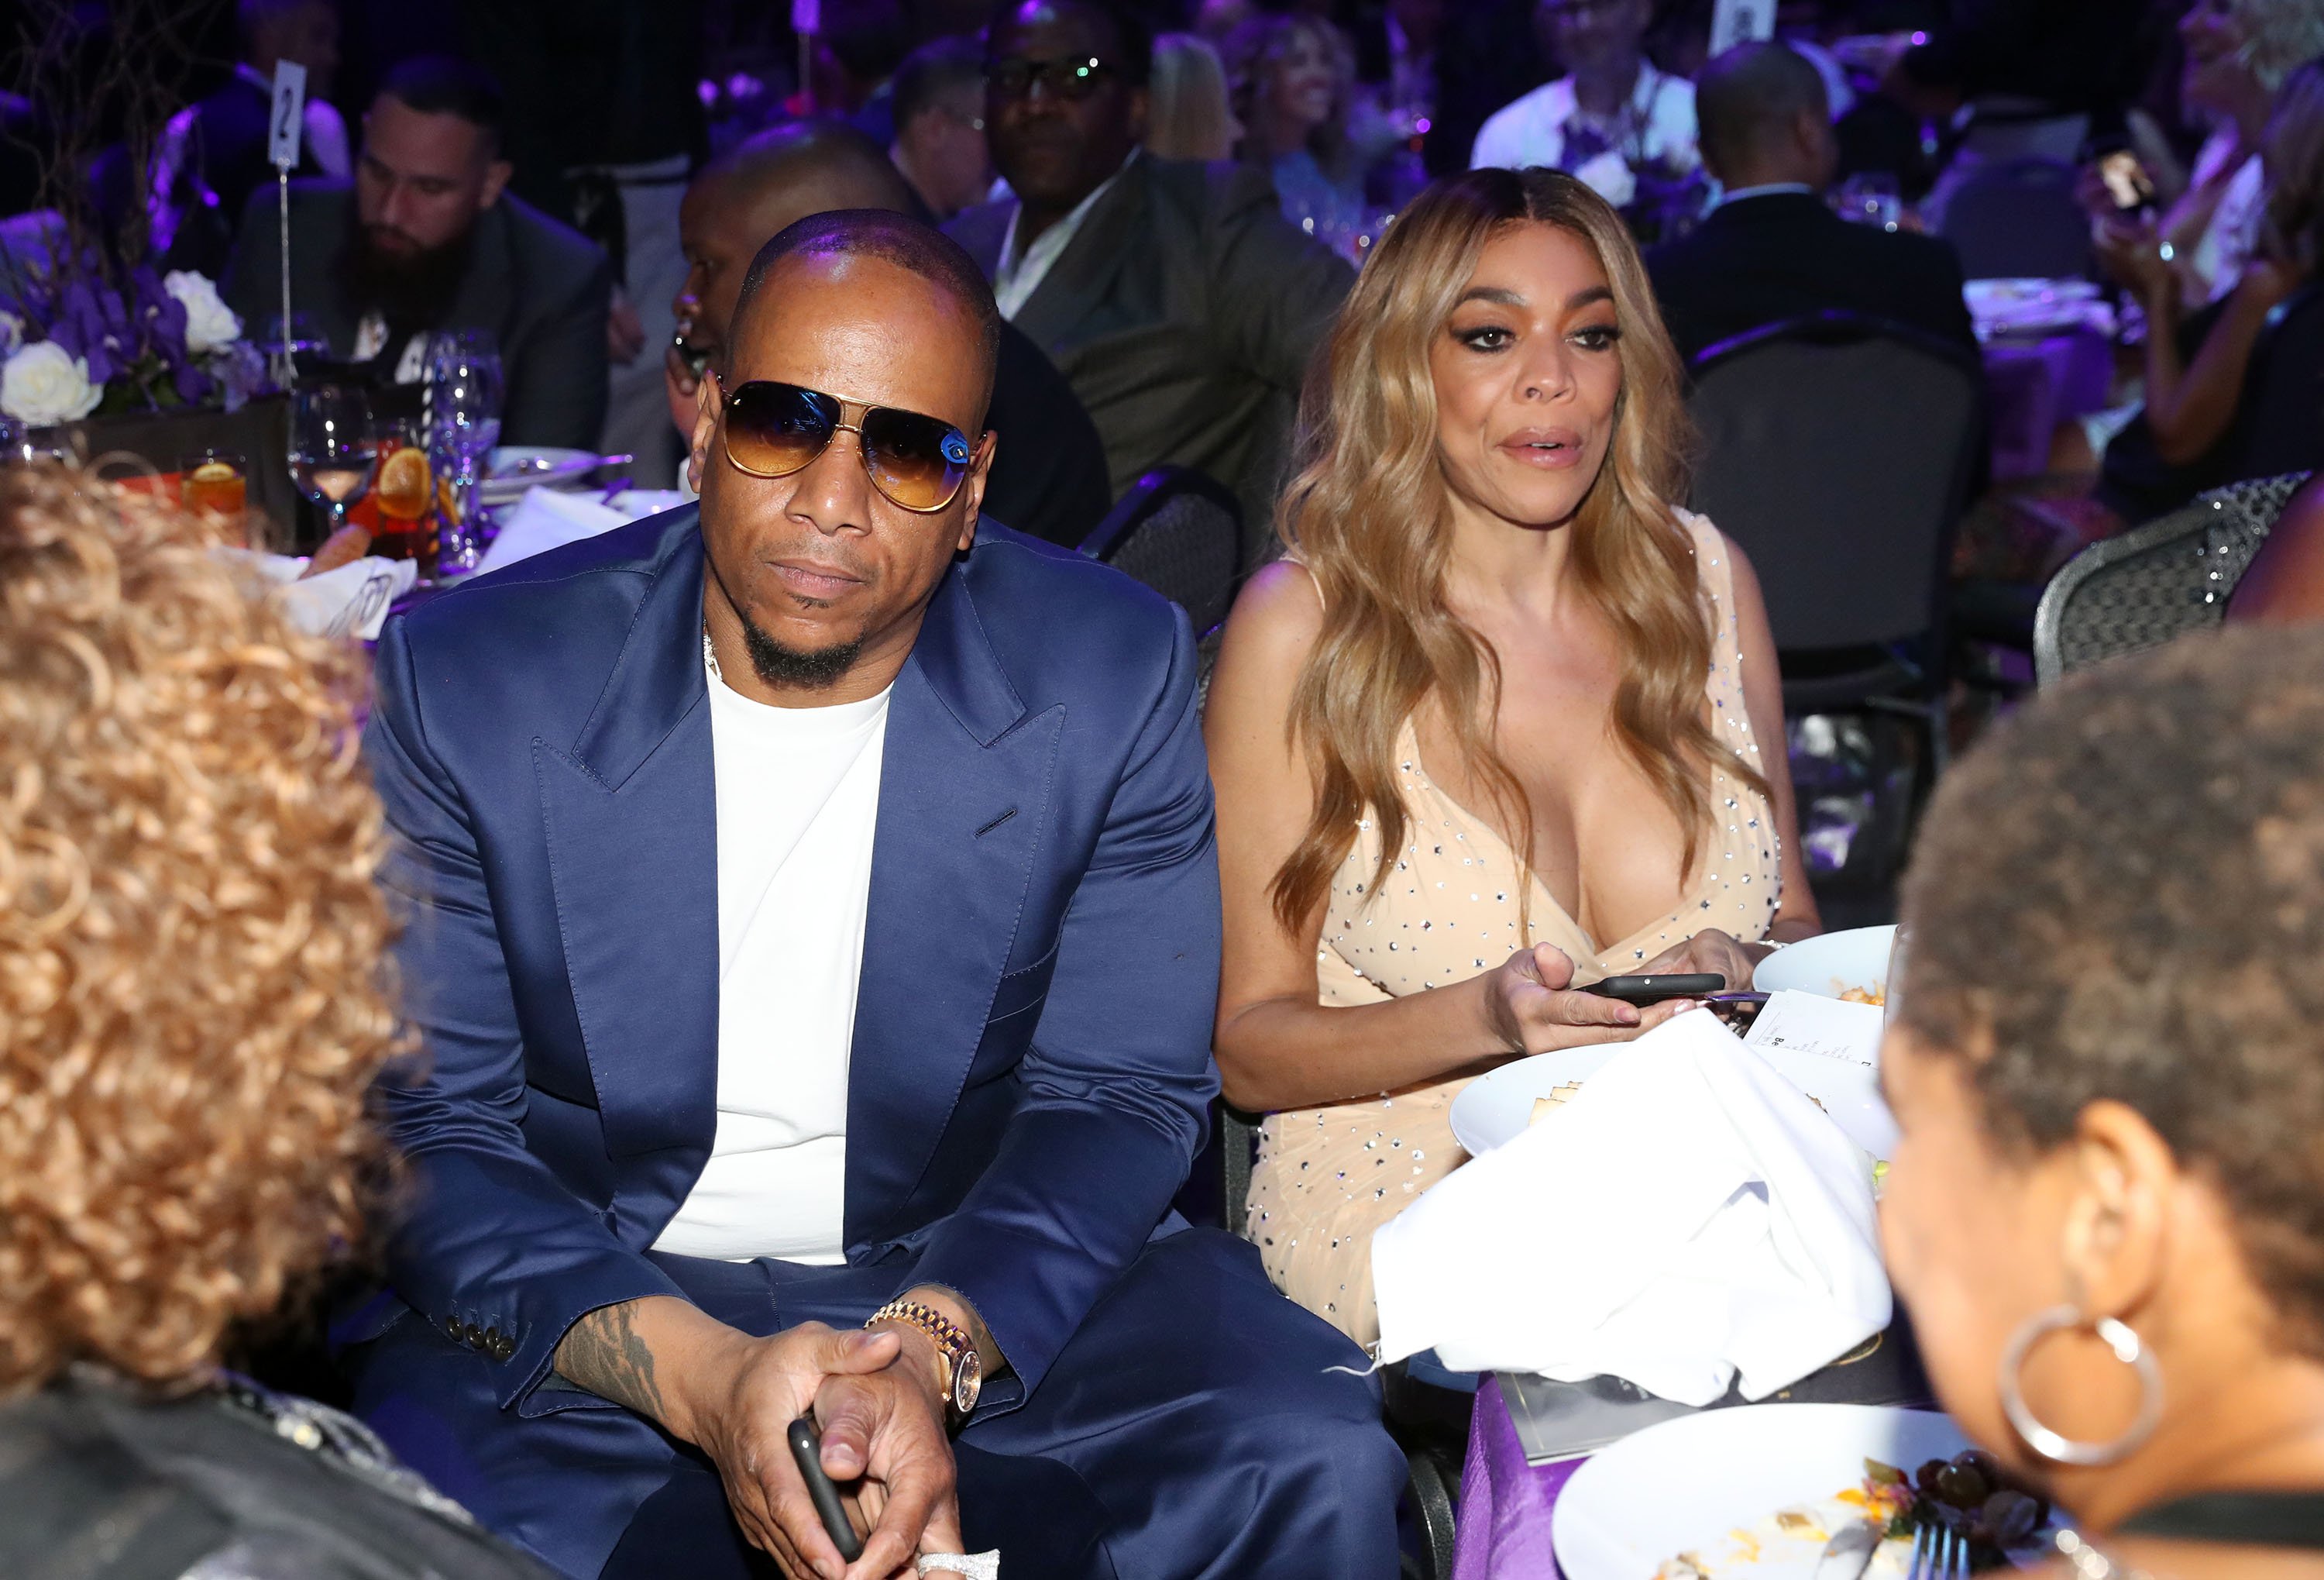 Wendy Williams looking away from the camera while wearing a gold dress and sitting next to Kevin Hunter wearing an all-blue suit.